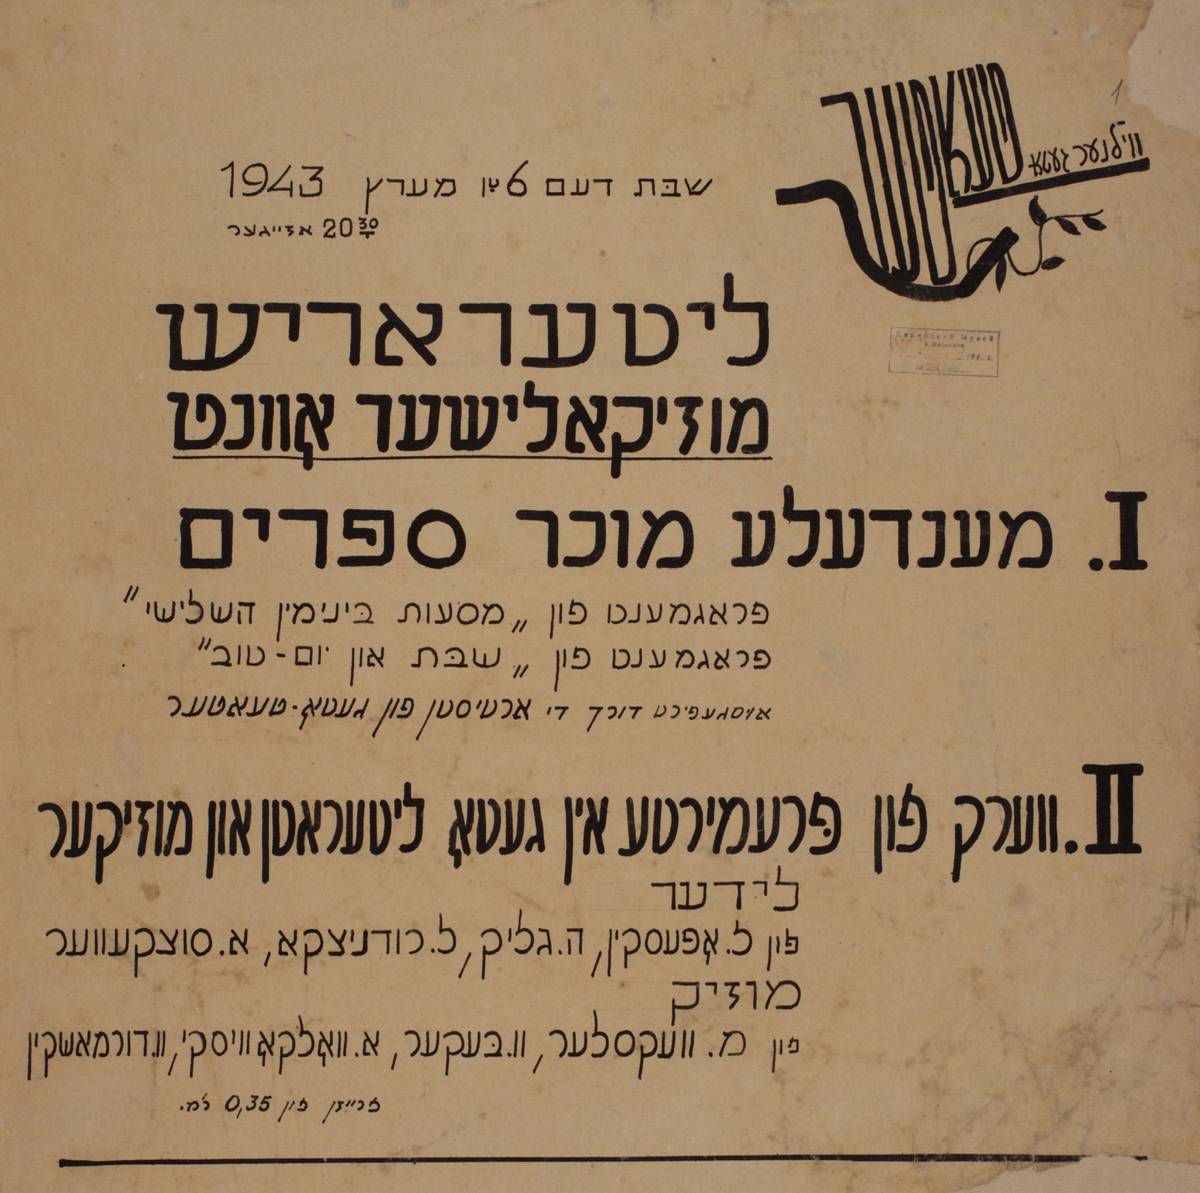 A poster from the 1943 performance event